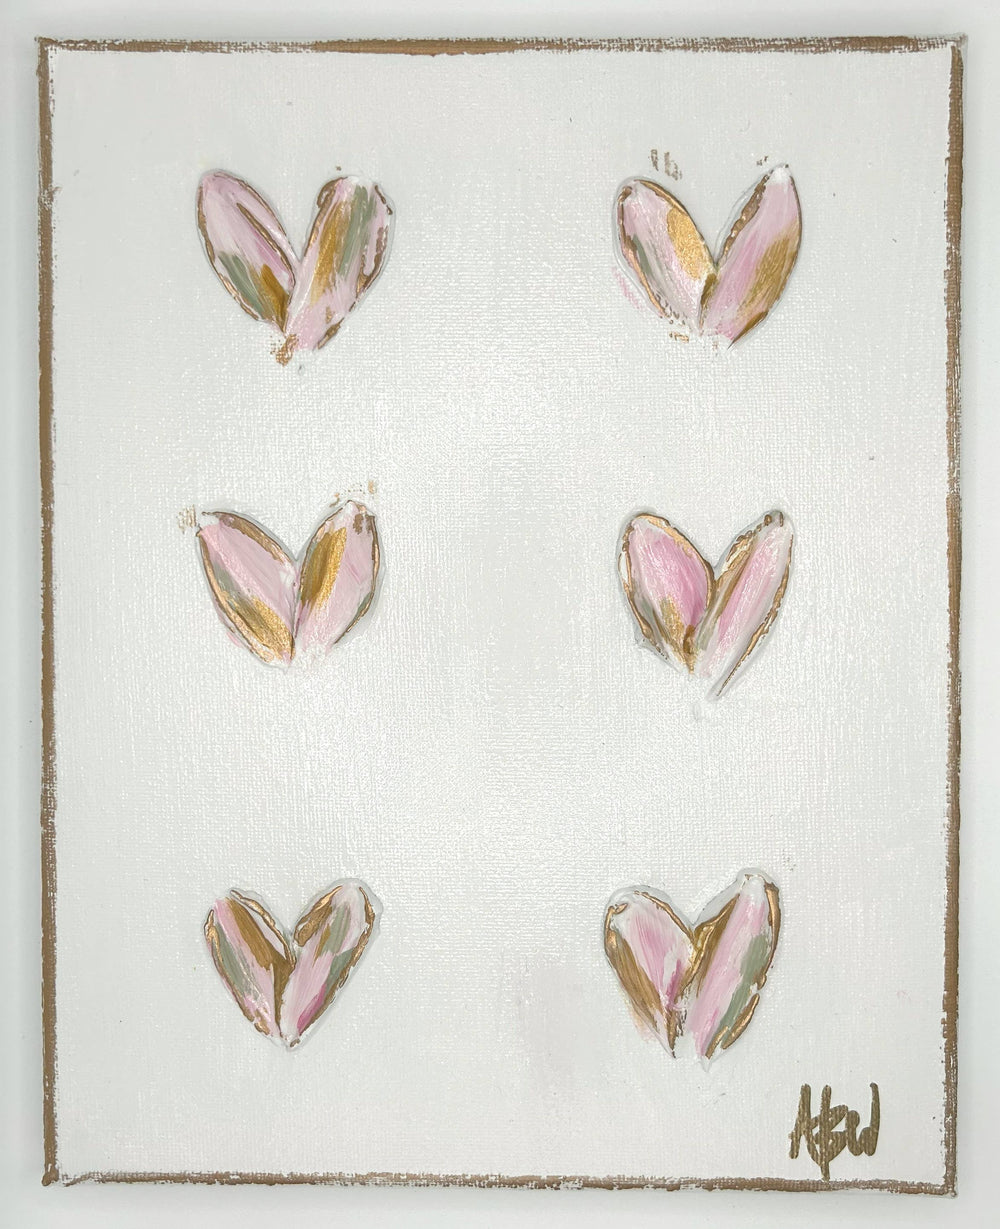 Mini hearts on canvas 8x10 - Bloom and Petal